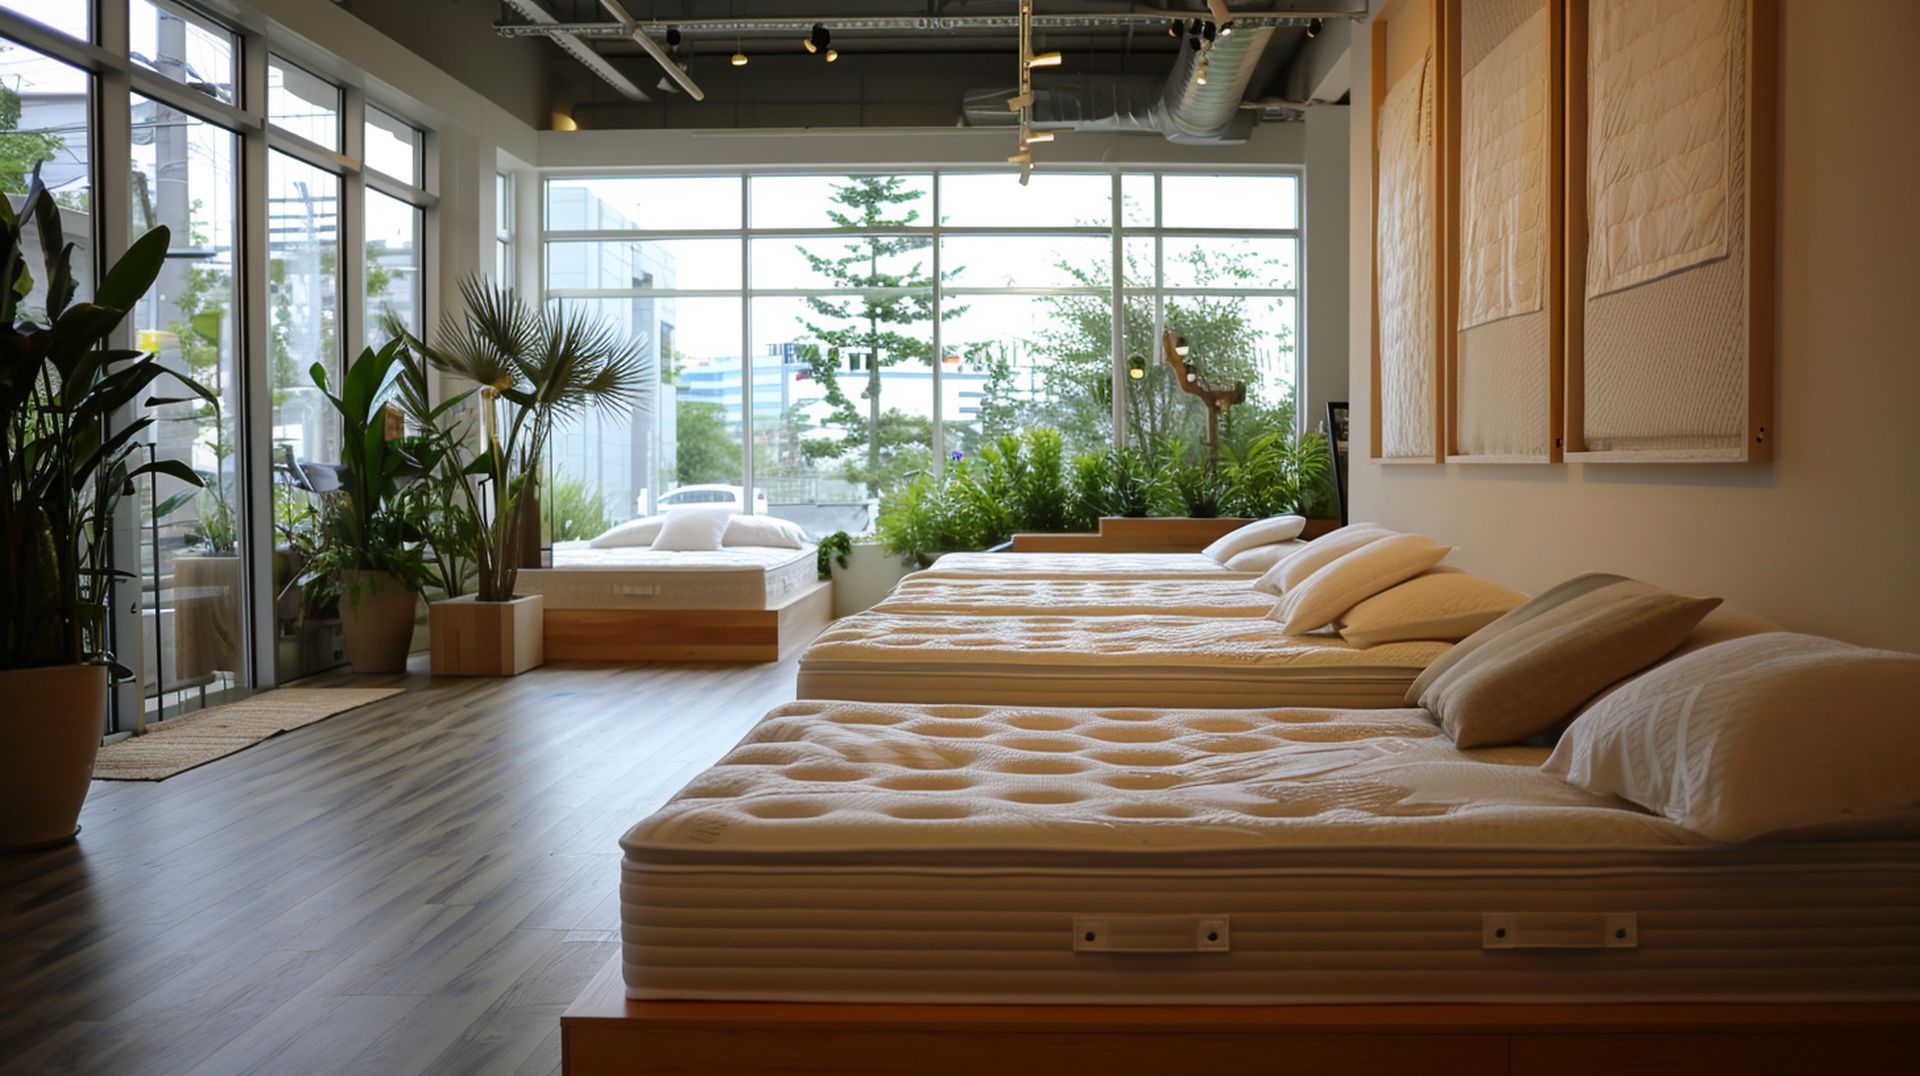 Types of mattresses at mattress dealers in Springfield, IL